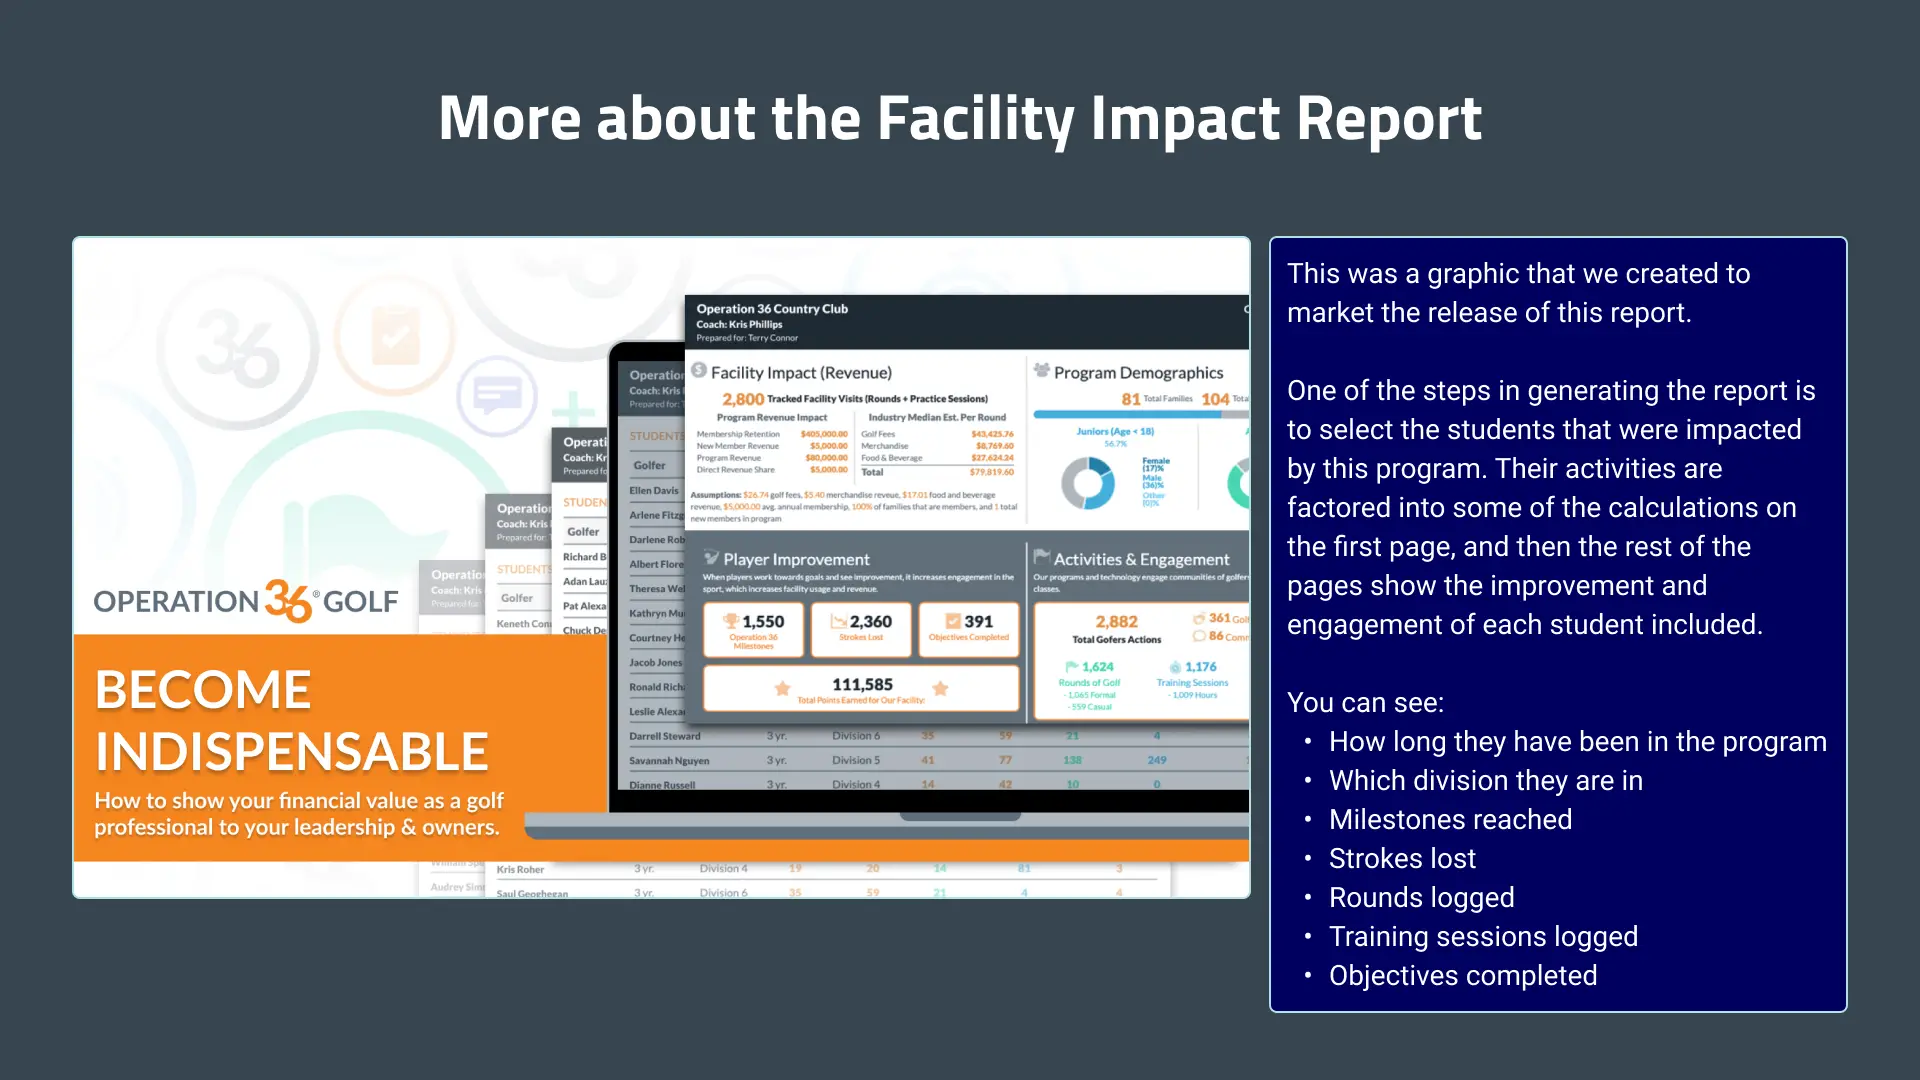 More about marketing for the Facility Impact Report.